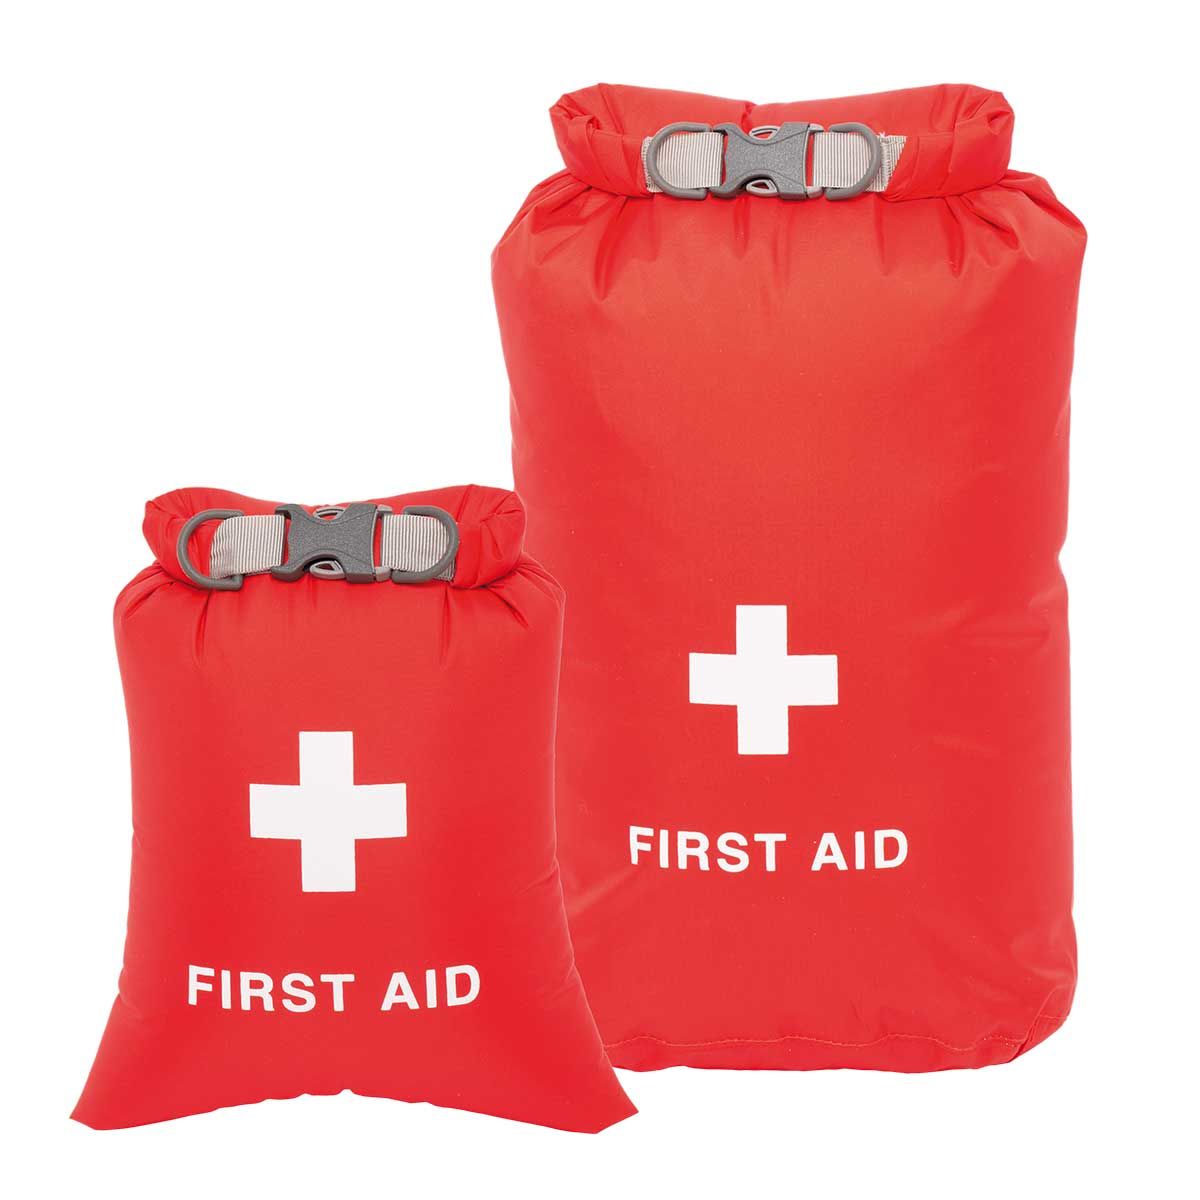 Exped waterproof bag for first aid kit